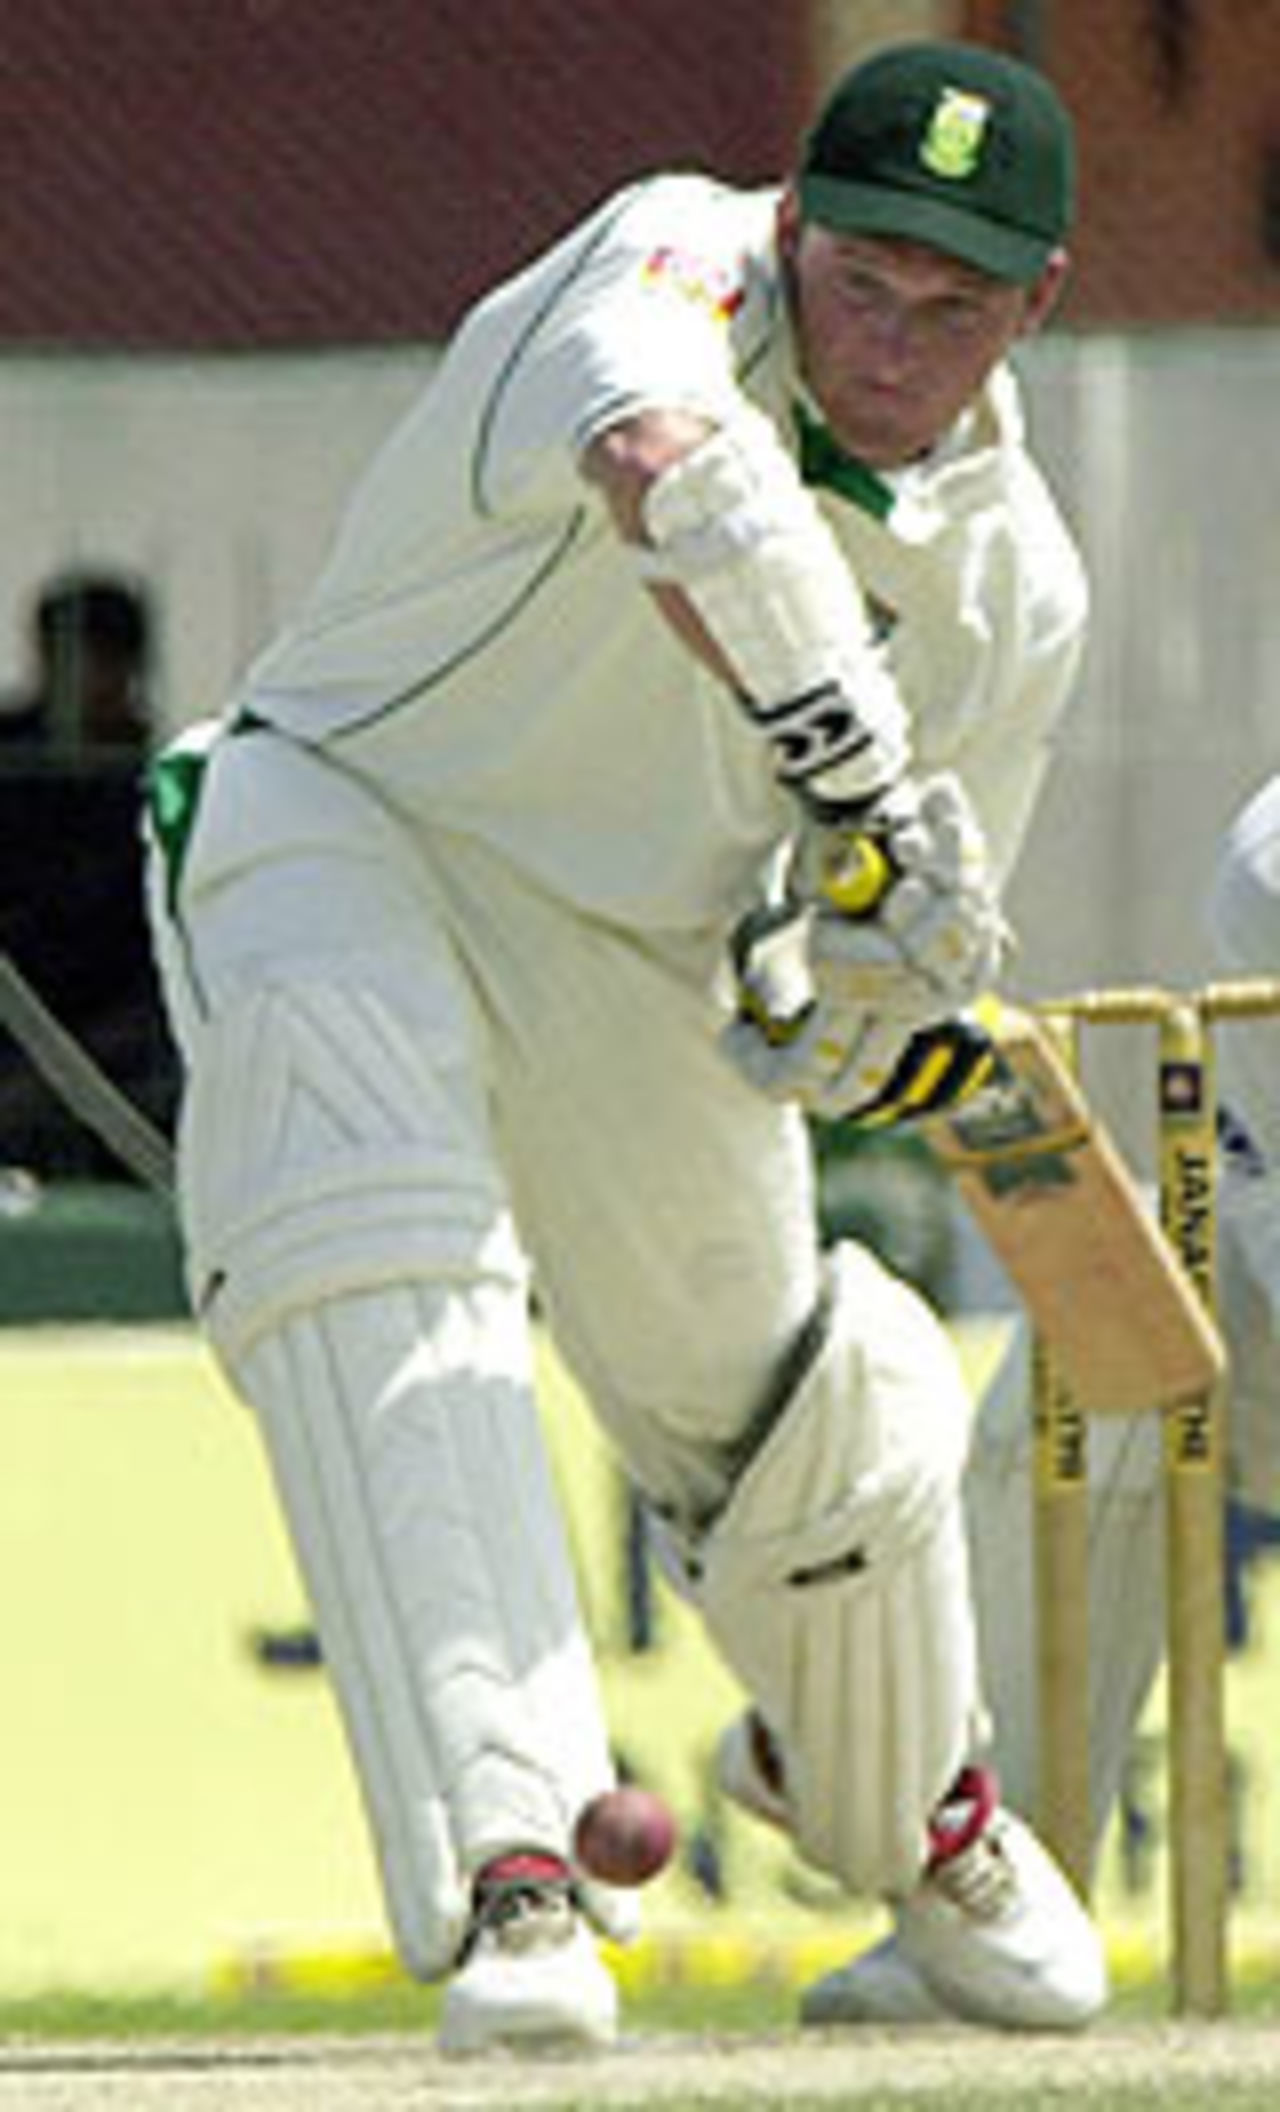 Graeme Smith on his way to 65, Sri Lanka v South Africa, 2nd Test, 3rd day, Colombo, August 13, 2004